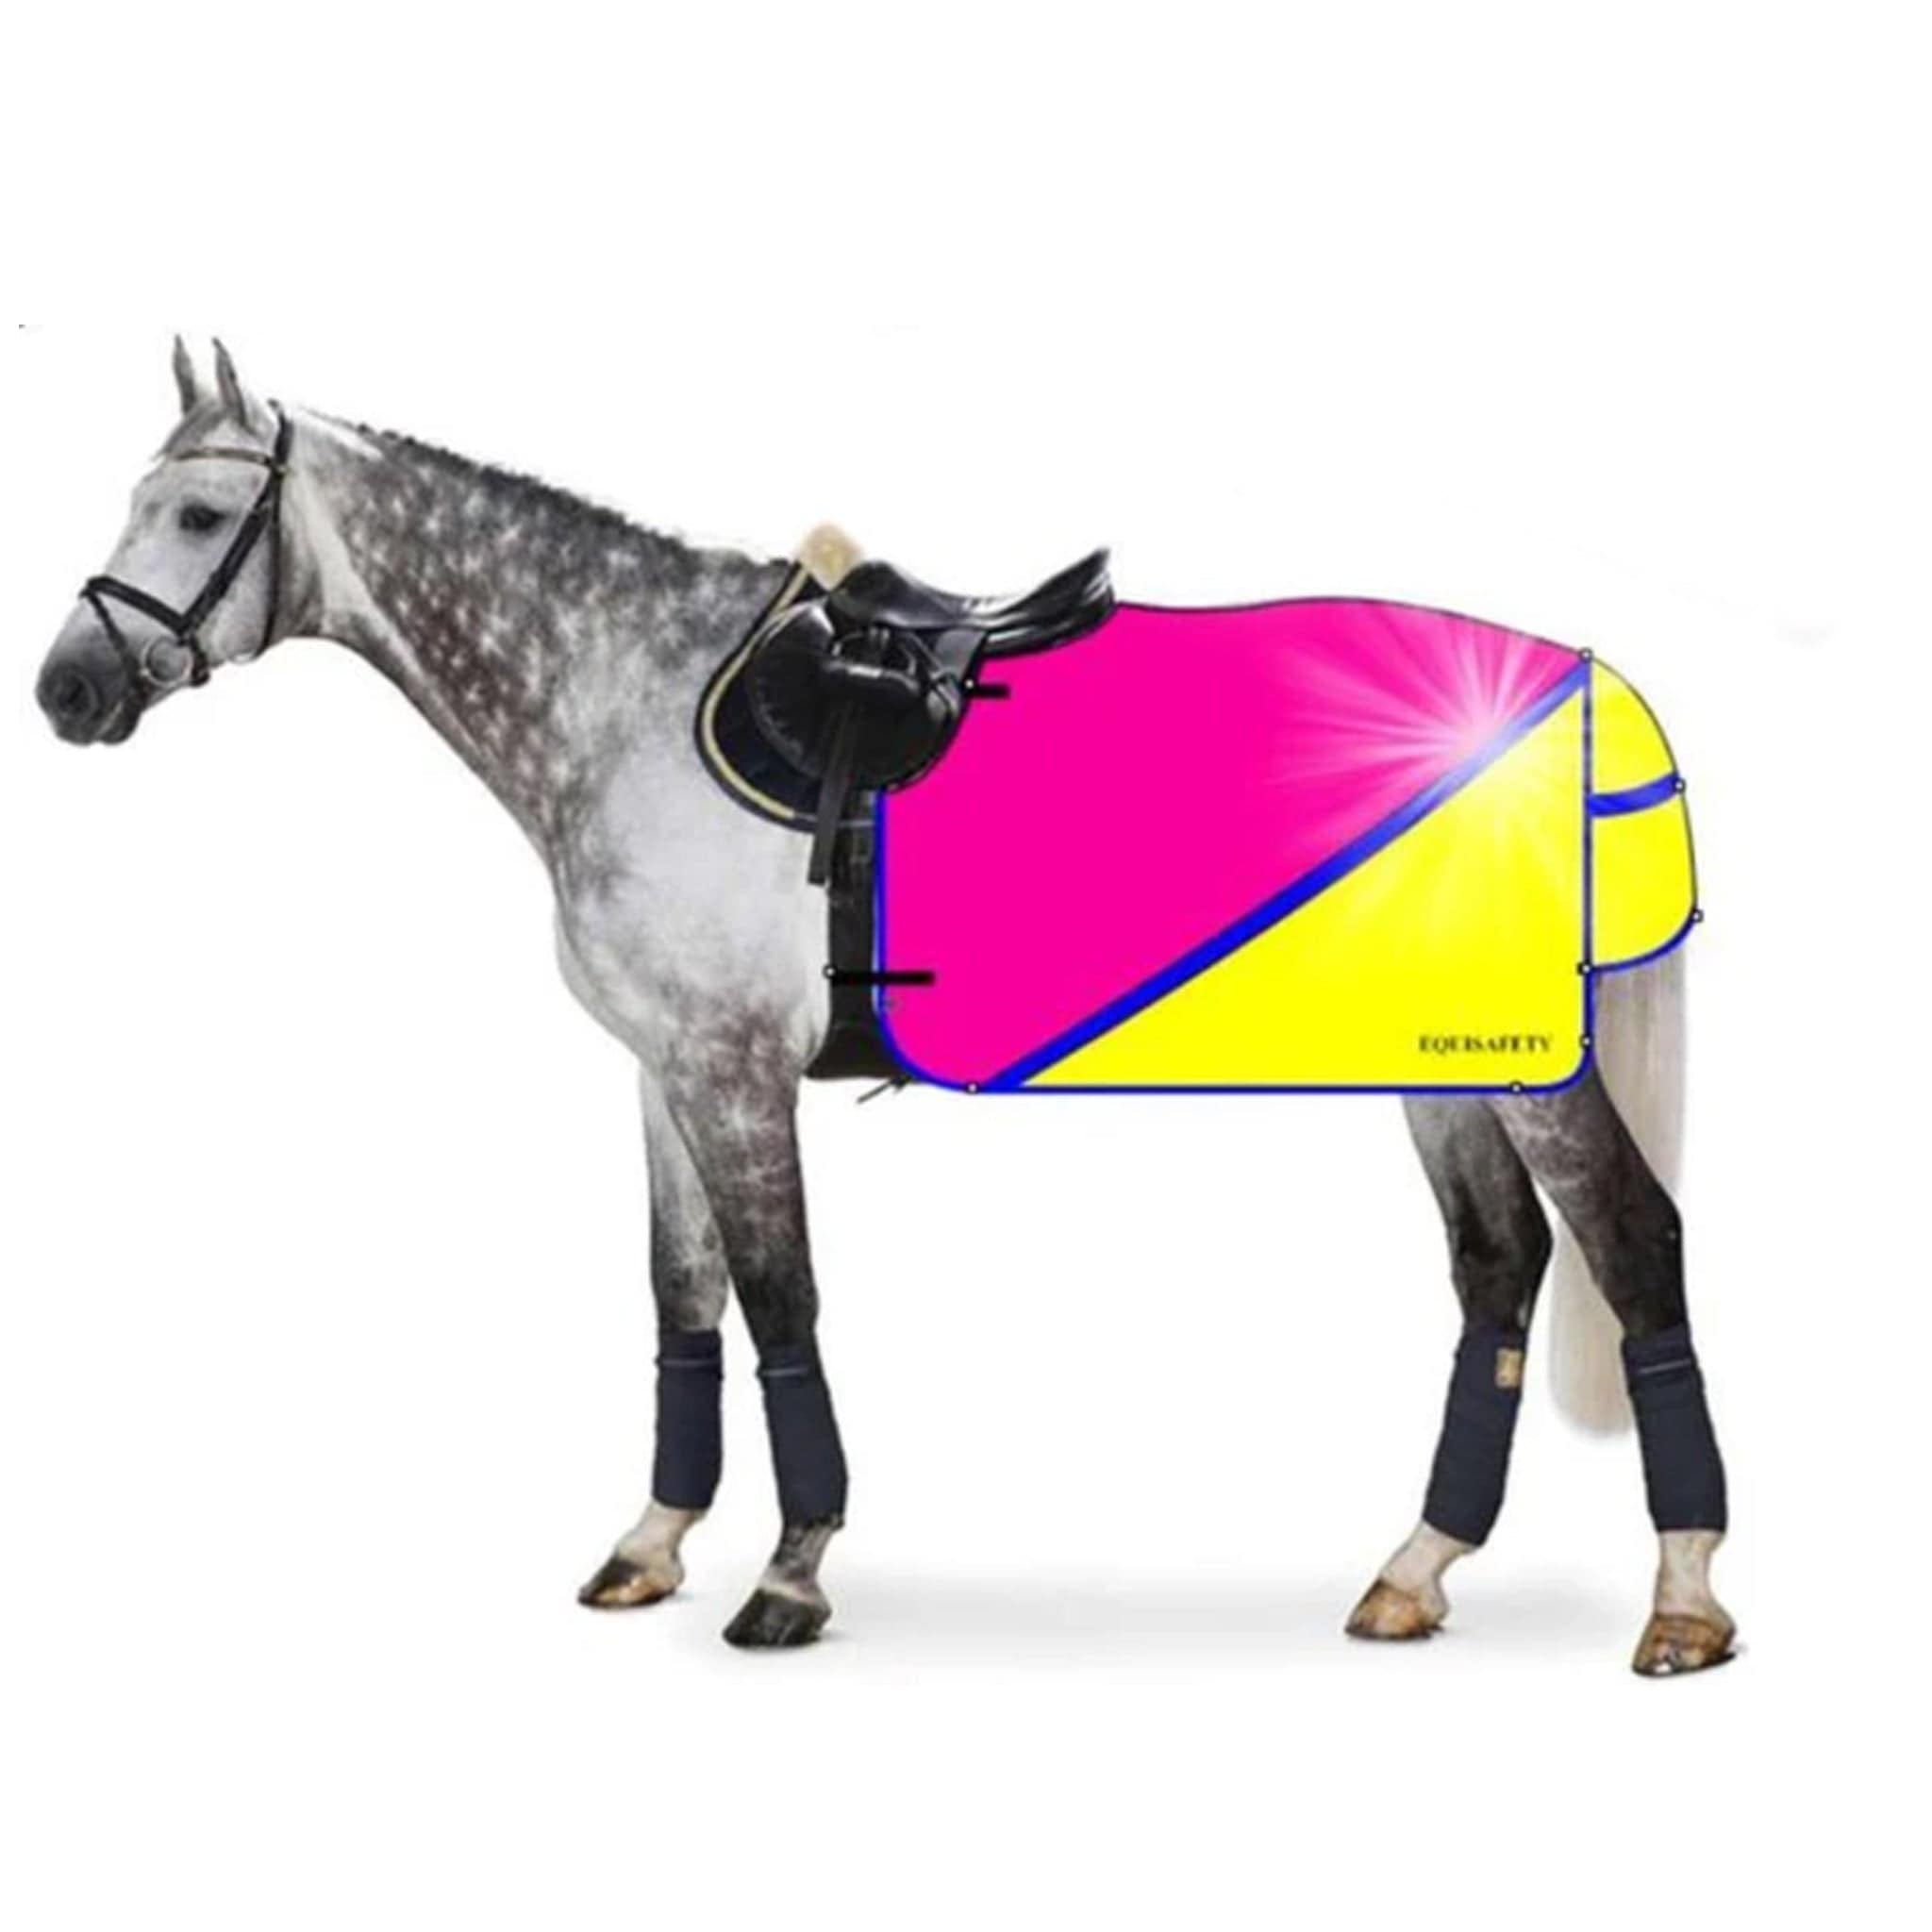 Equisafety Charlotte Dujardin Waterproof Hi Viz Exercise Sheet Pink and Yellow CD-MCQWS